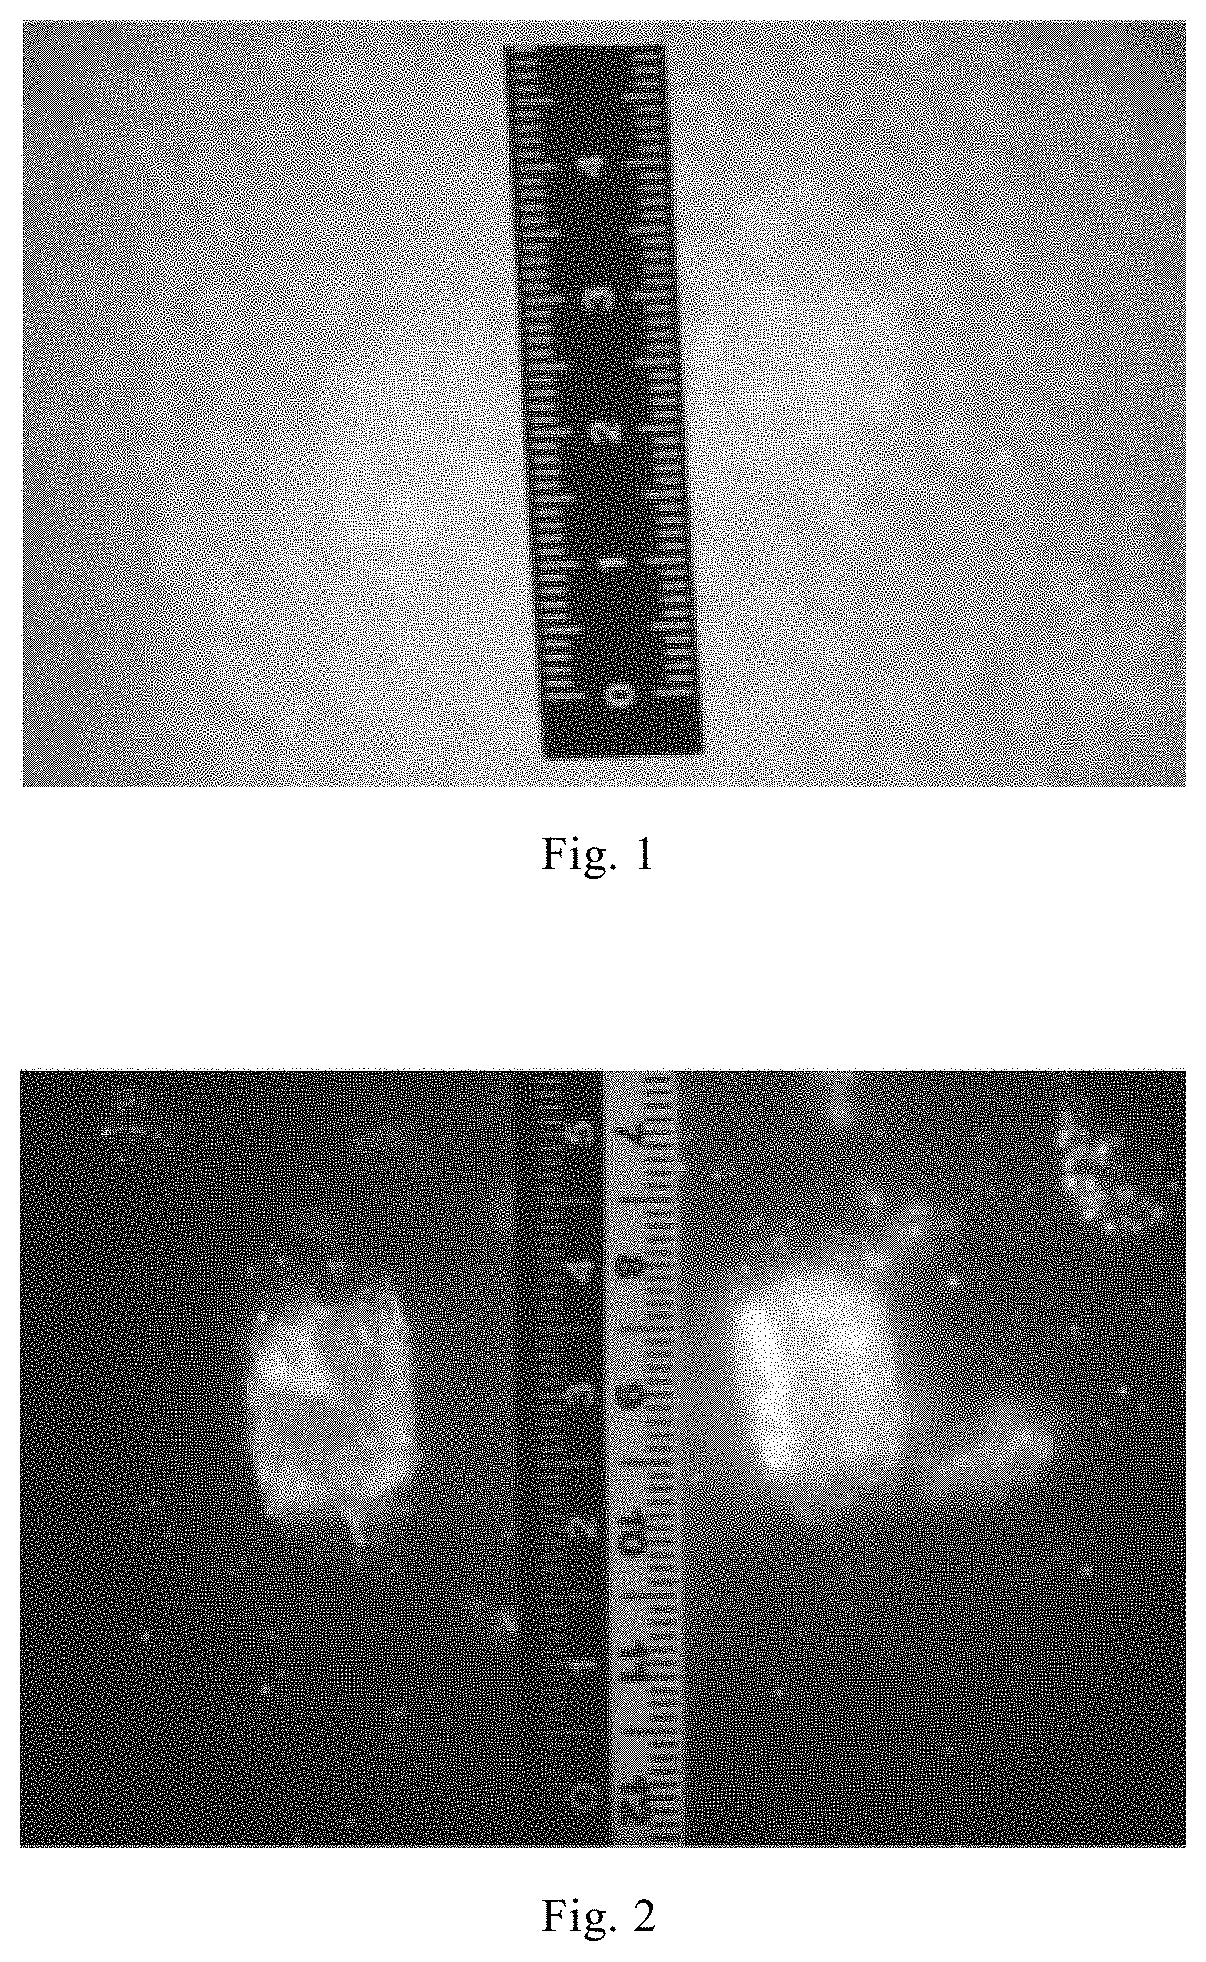 Method for developing biological trace evidence on porous object